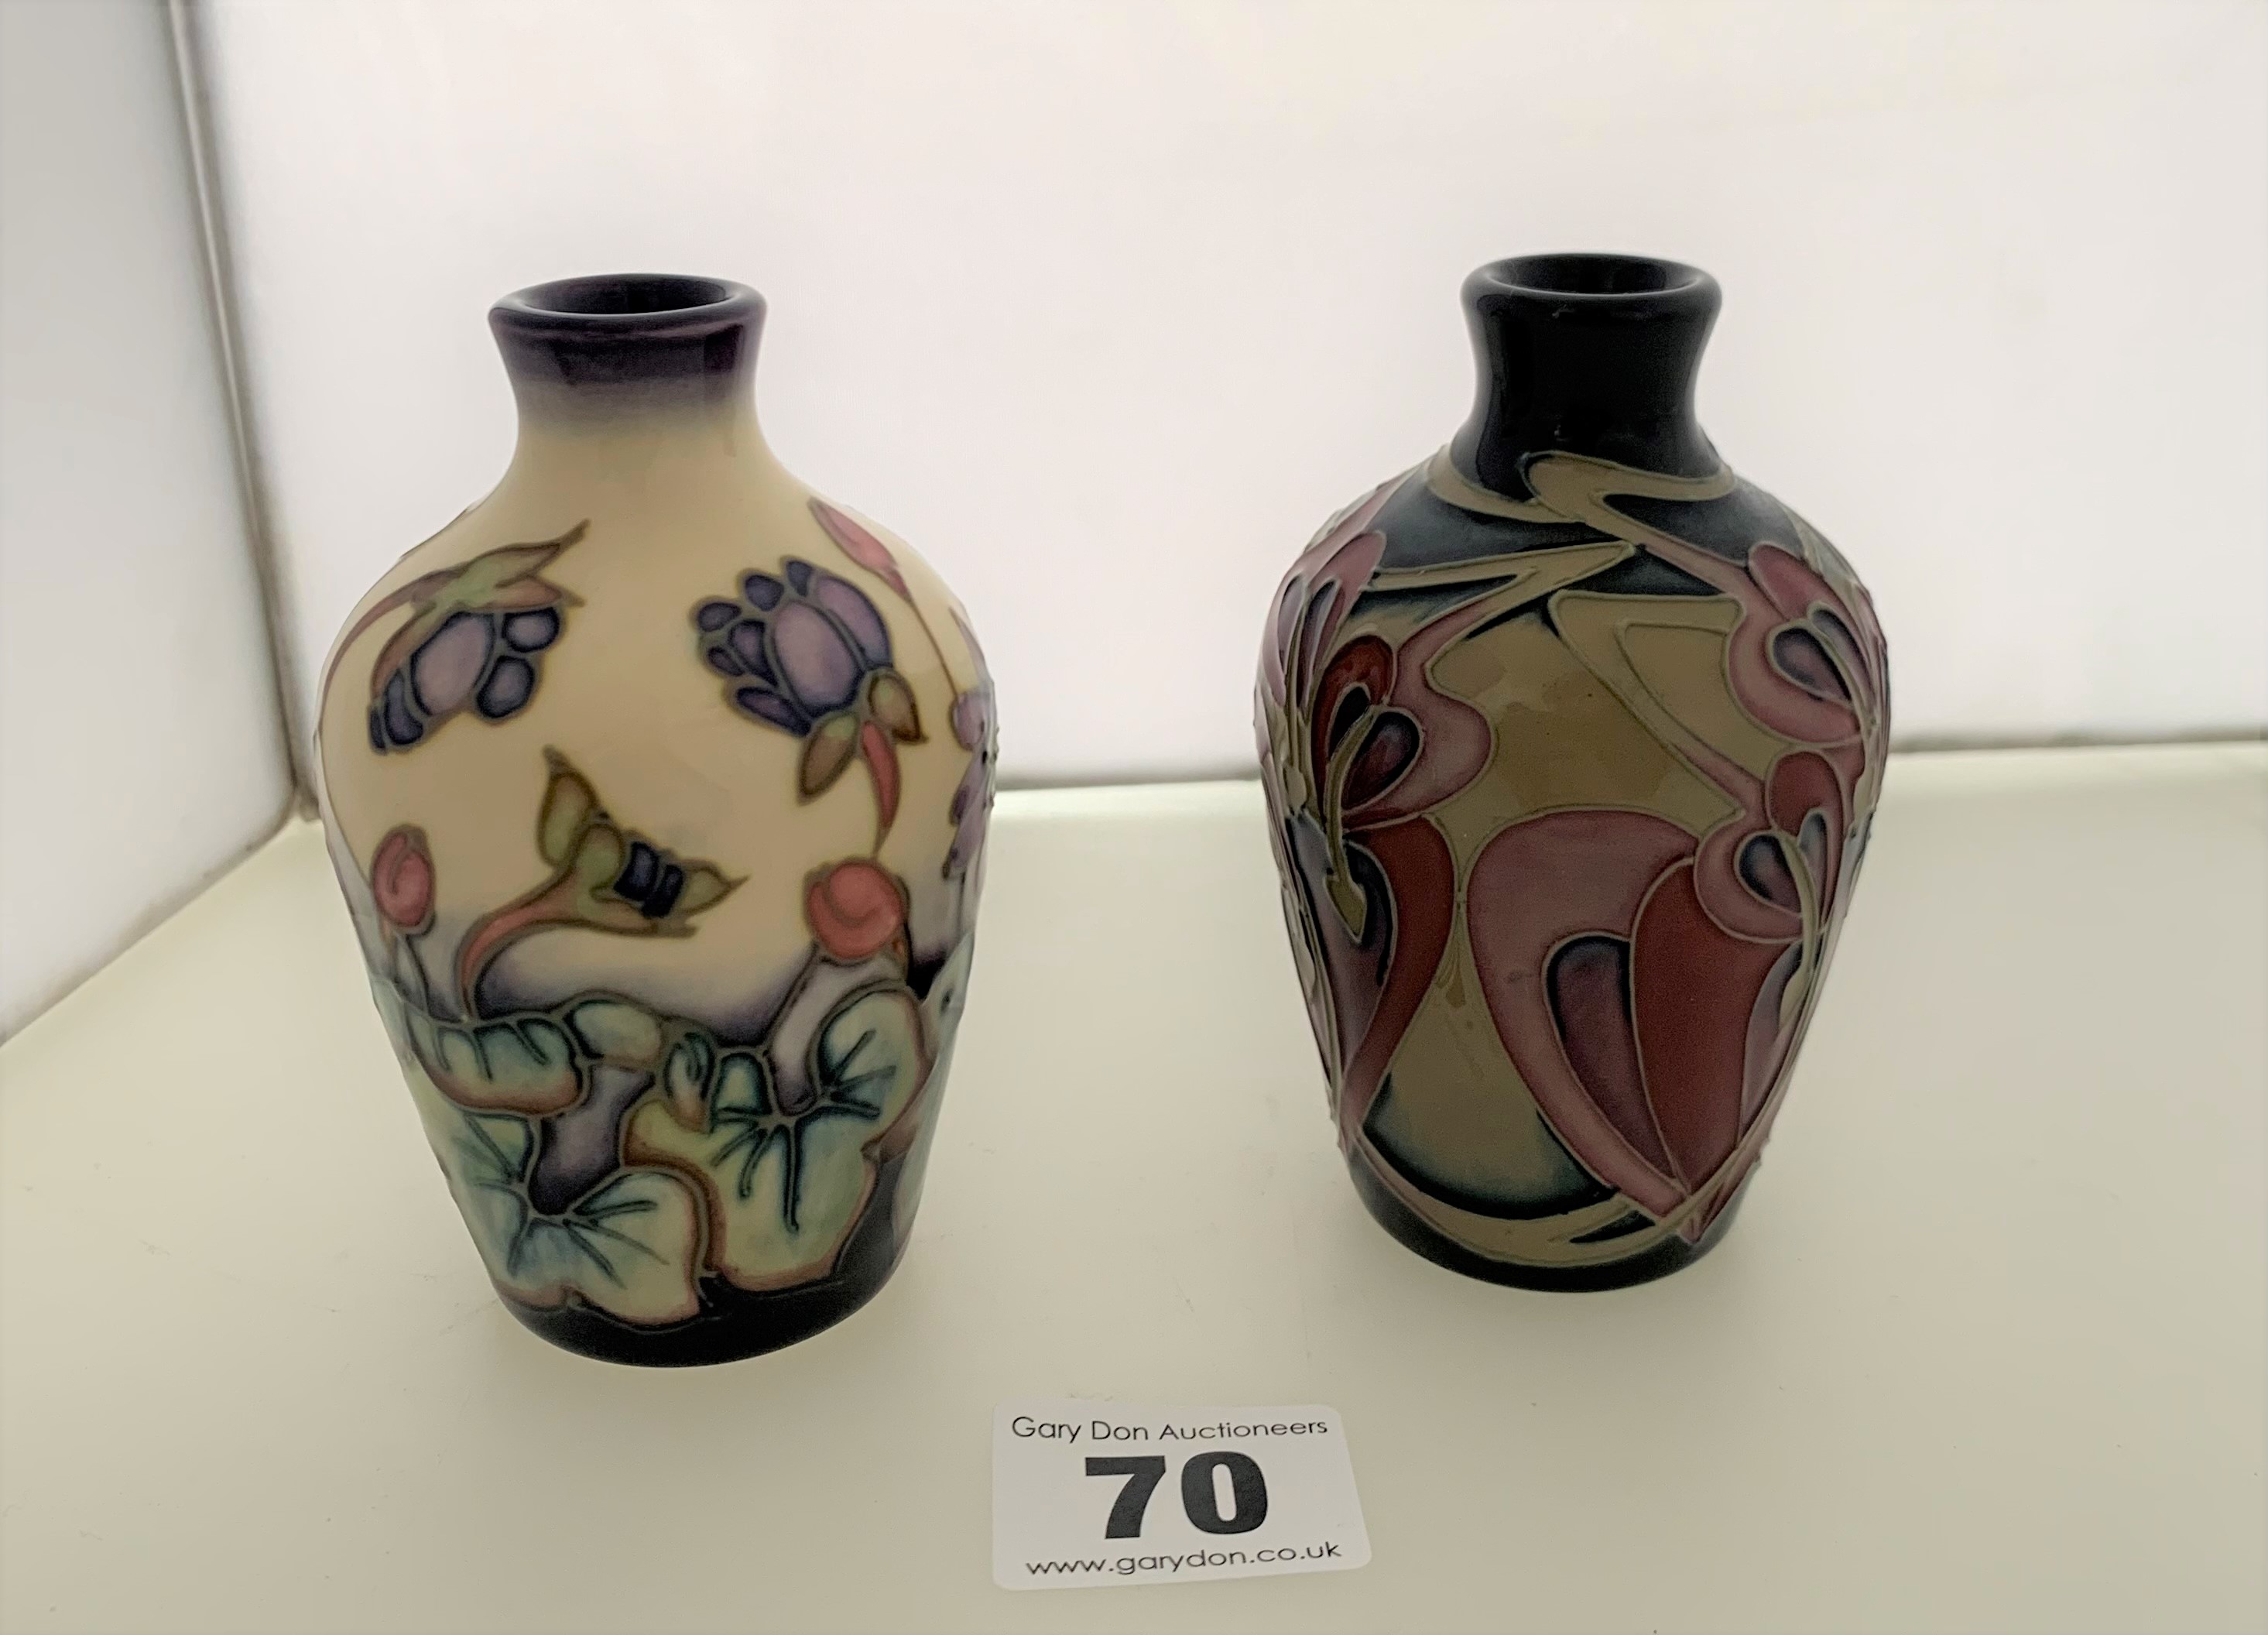 2 small Moorcroft vases 4” high, 2008 and 2009